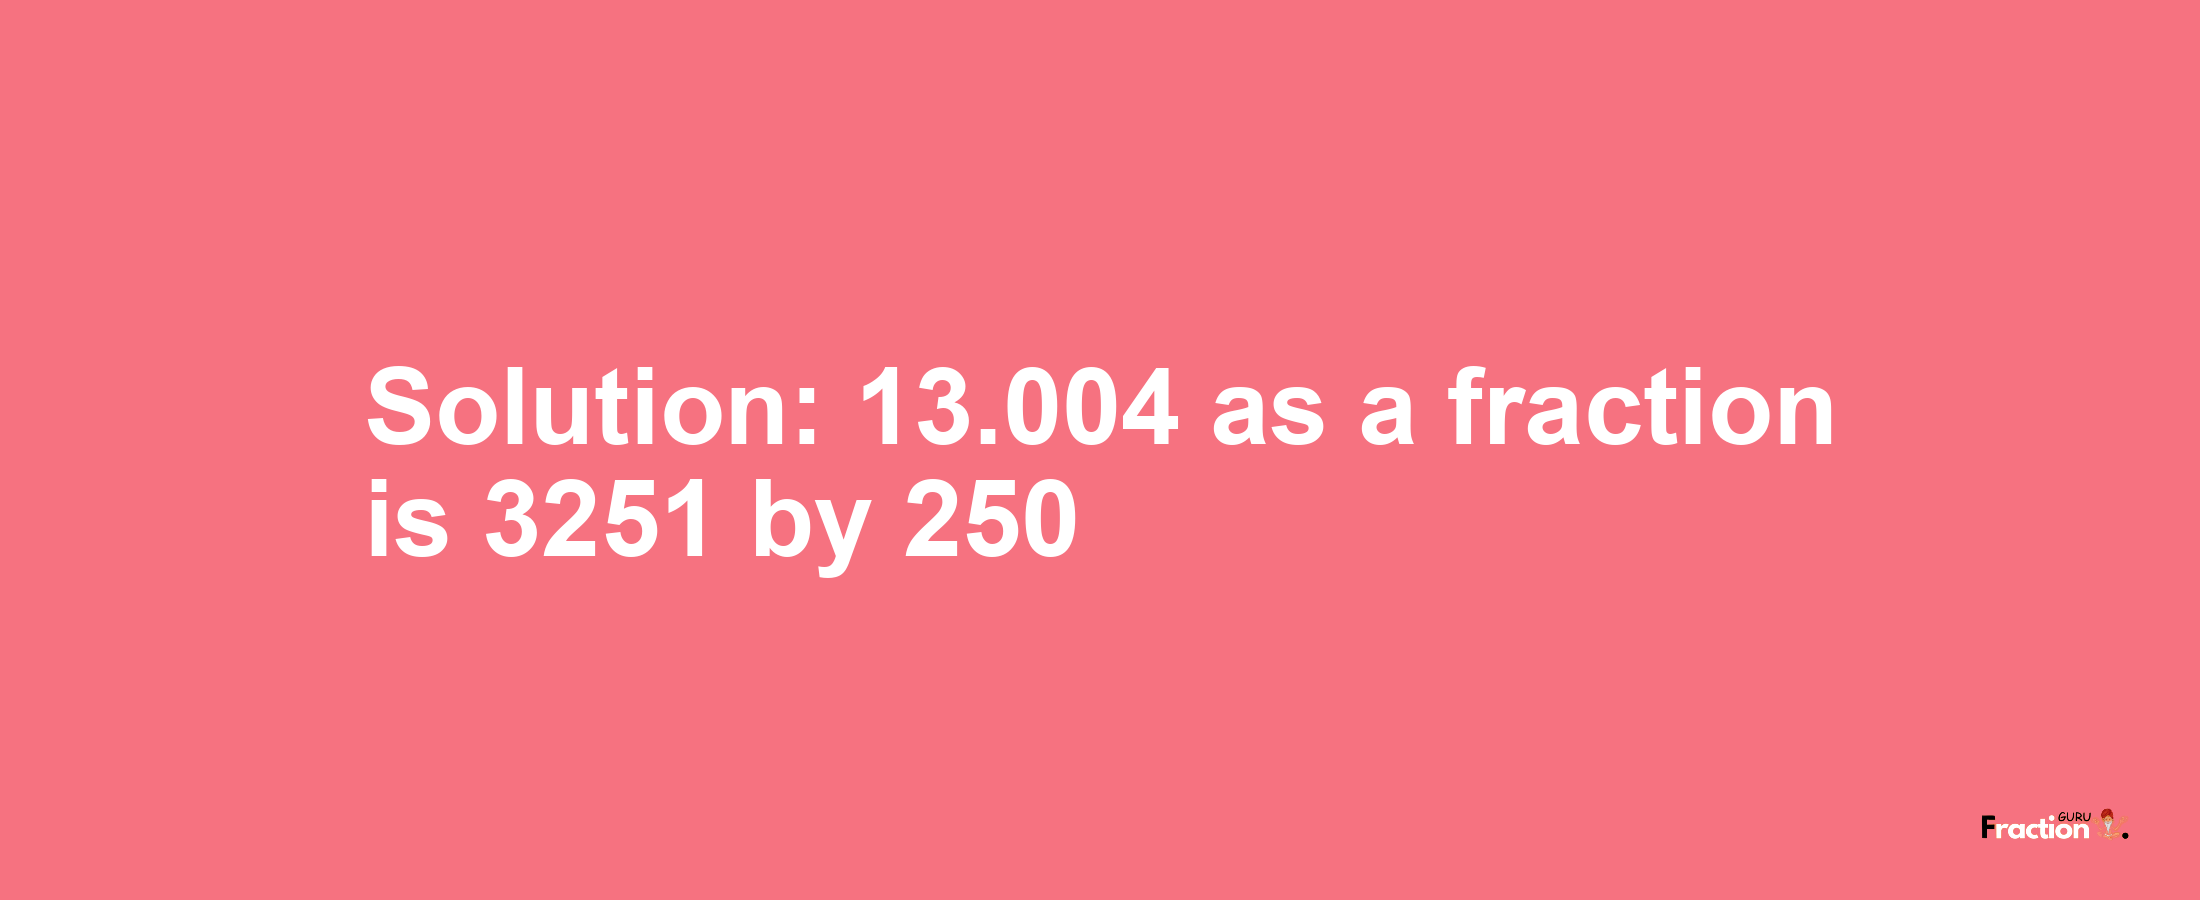 Solution:13.004 as a fraction is 3251/250